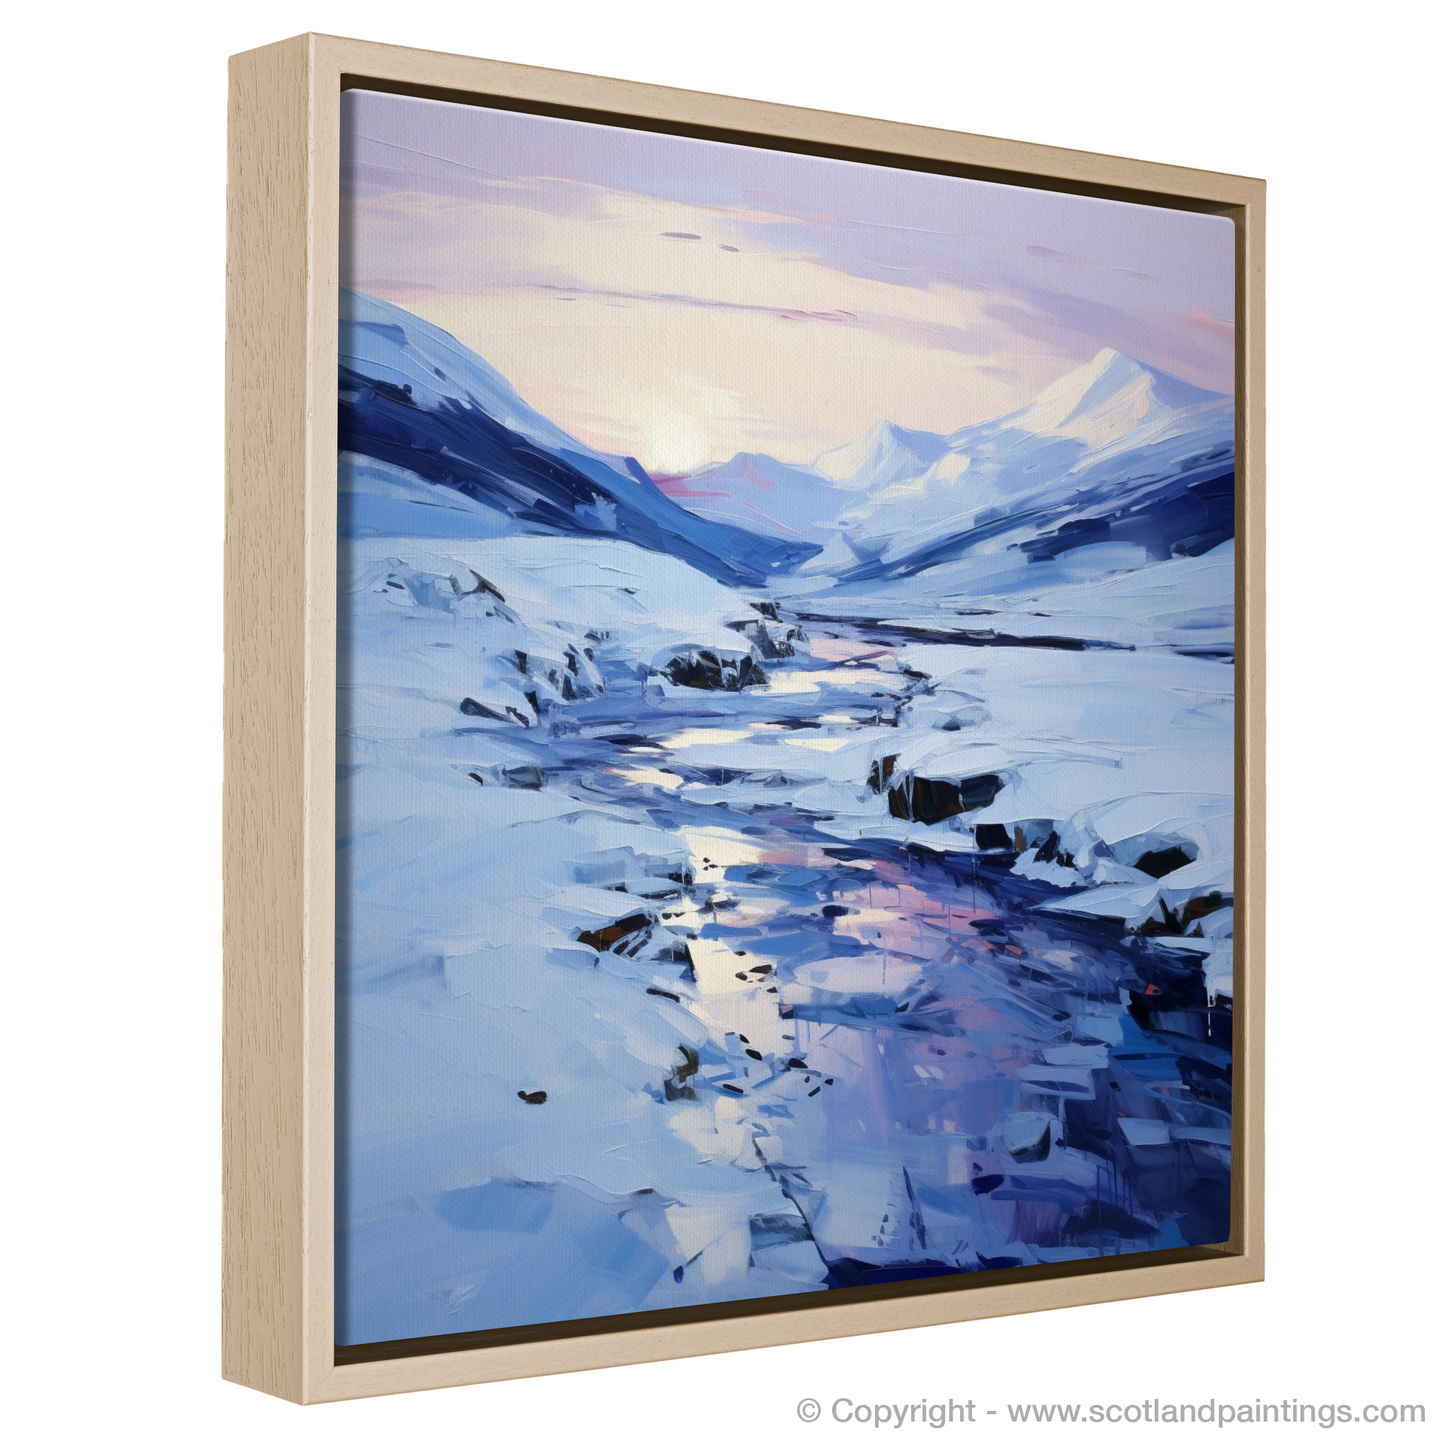 Painting and Art Print of Pristine snow at dusk in Glencoe entitled "Twilight Serenade in Glencoe Snow".